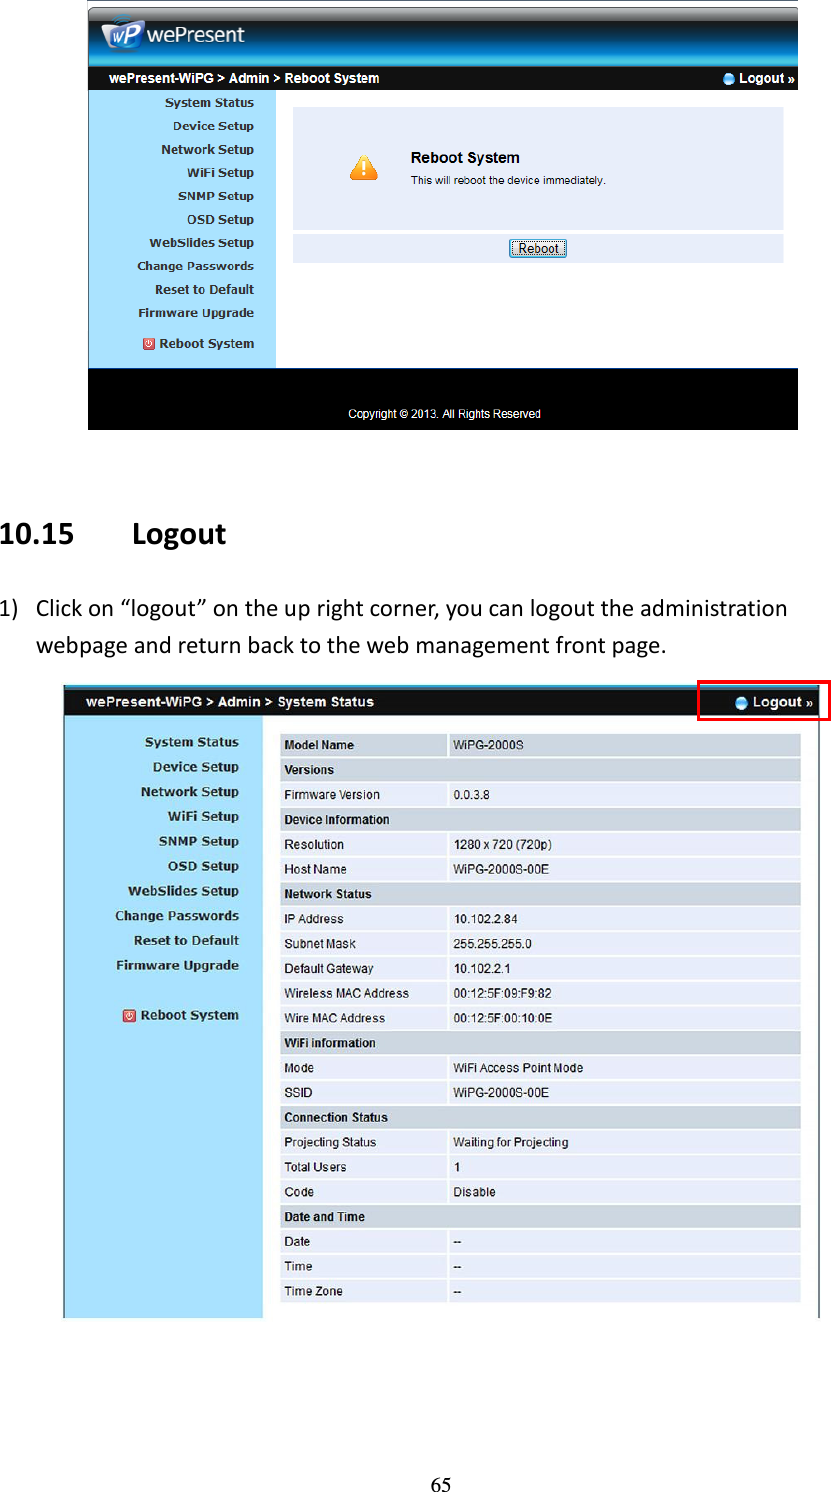   65  10.15   Logout 1) Click on “logout” on the up right corner, you can logout the administration webpage and return back to the web management front page.     